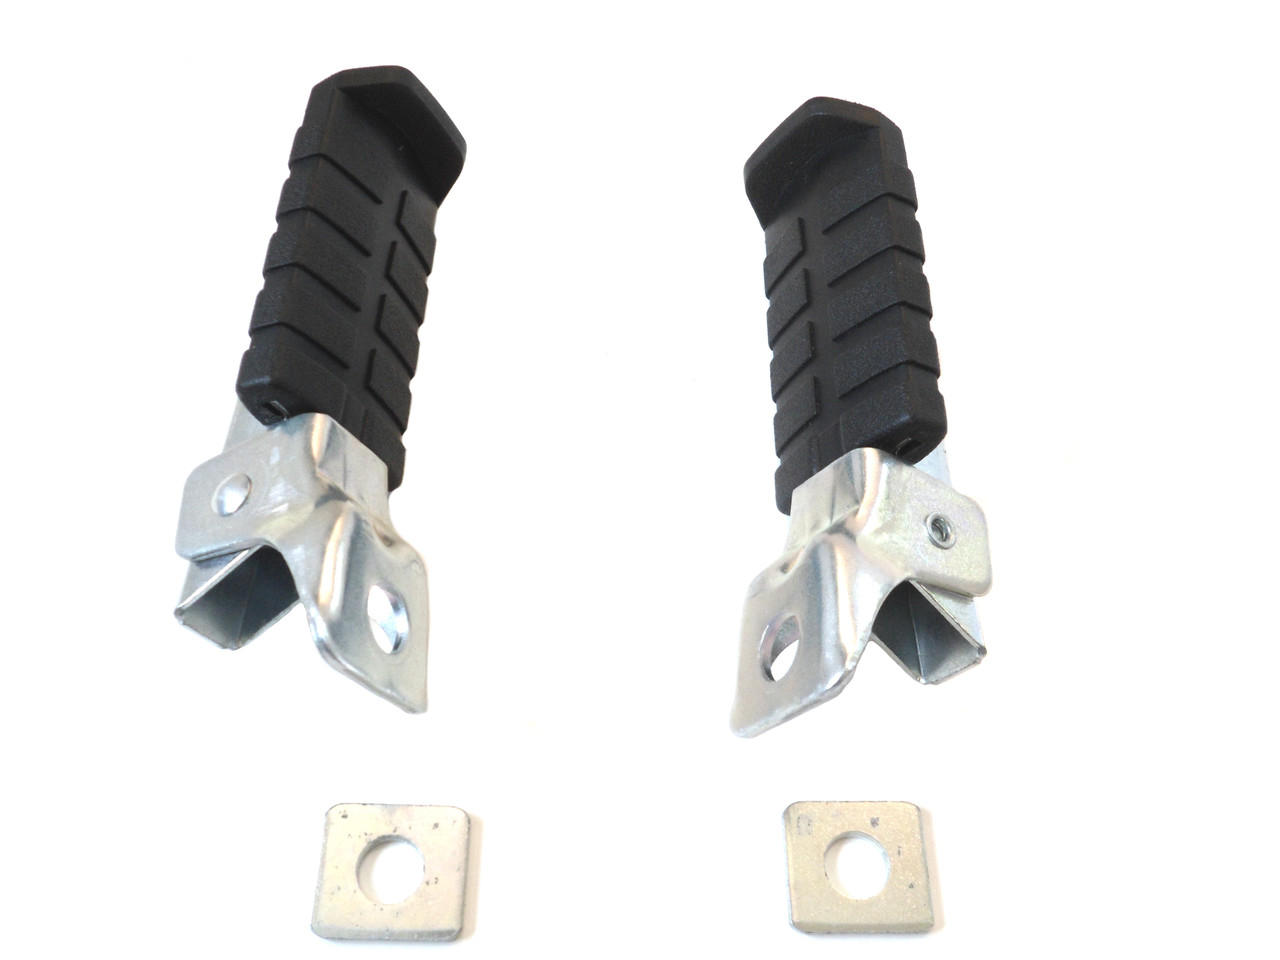 Universal Moped Folding Foot Pegs, Large - Inverted